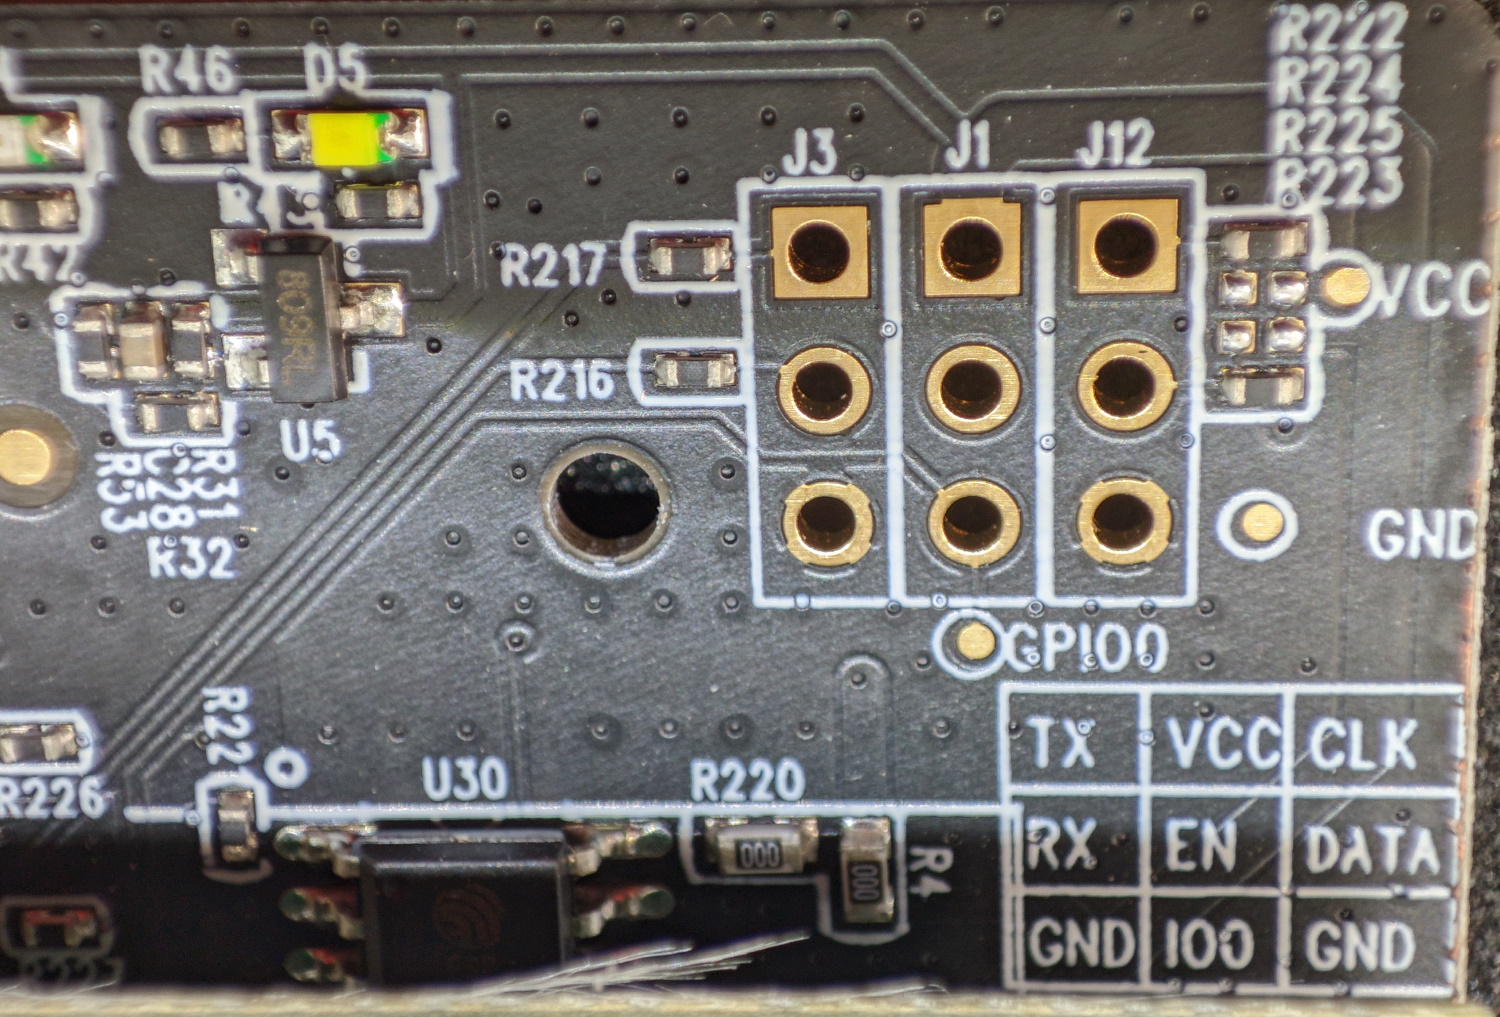 GL-S10 pins are labelled